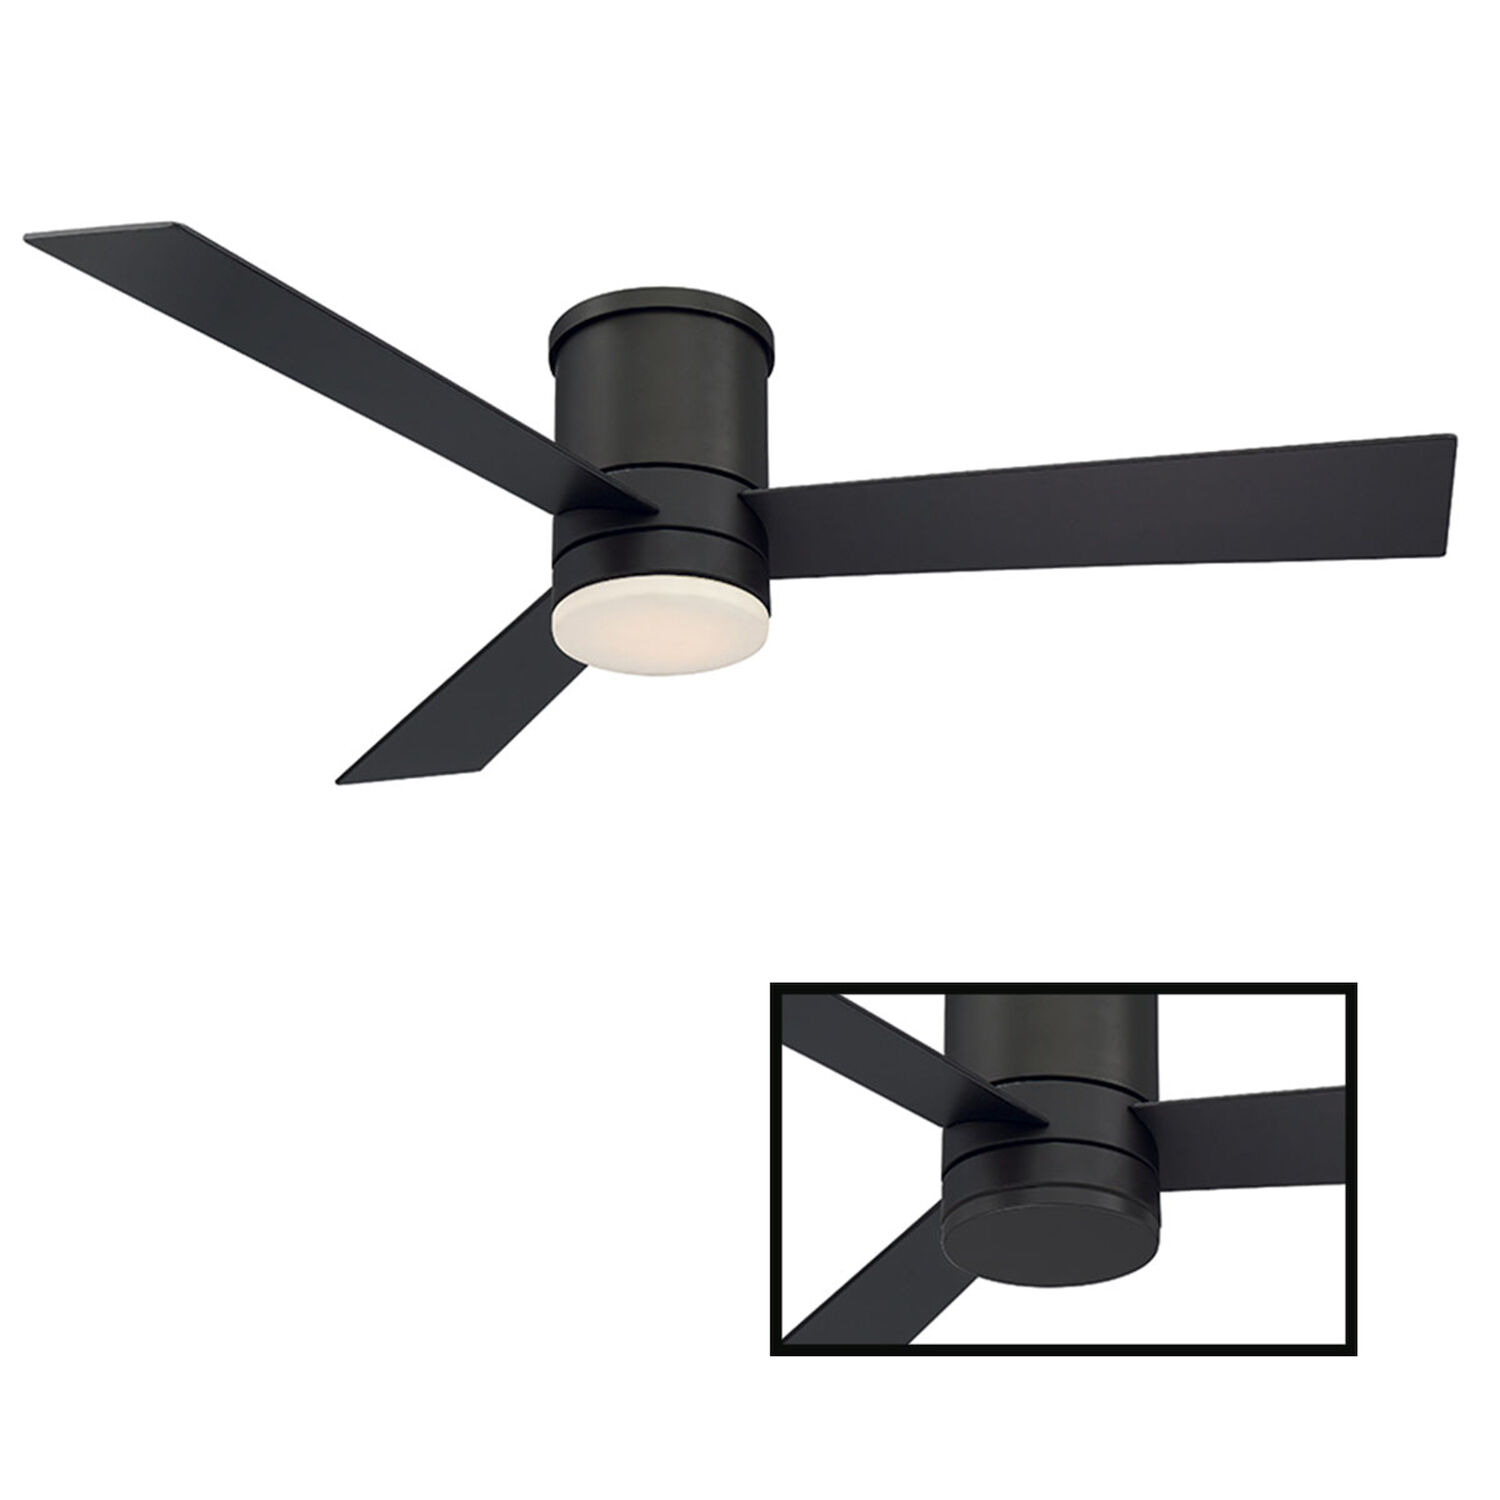 Axis 52 Inch Flush Mount Ceiling Fan, What Are Flush Mount Ceiling Fans